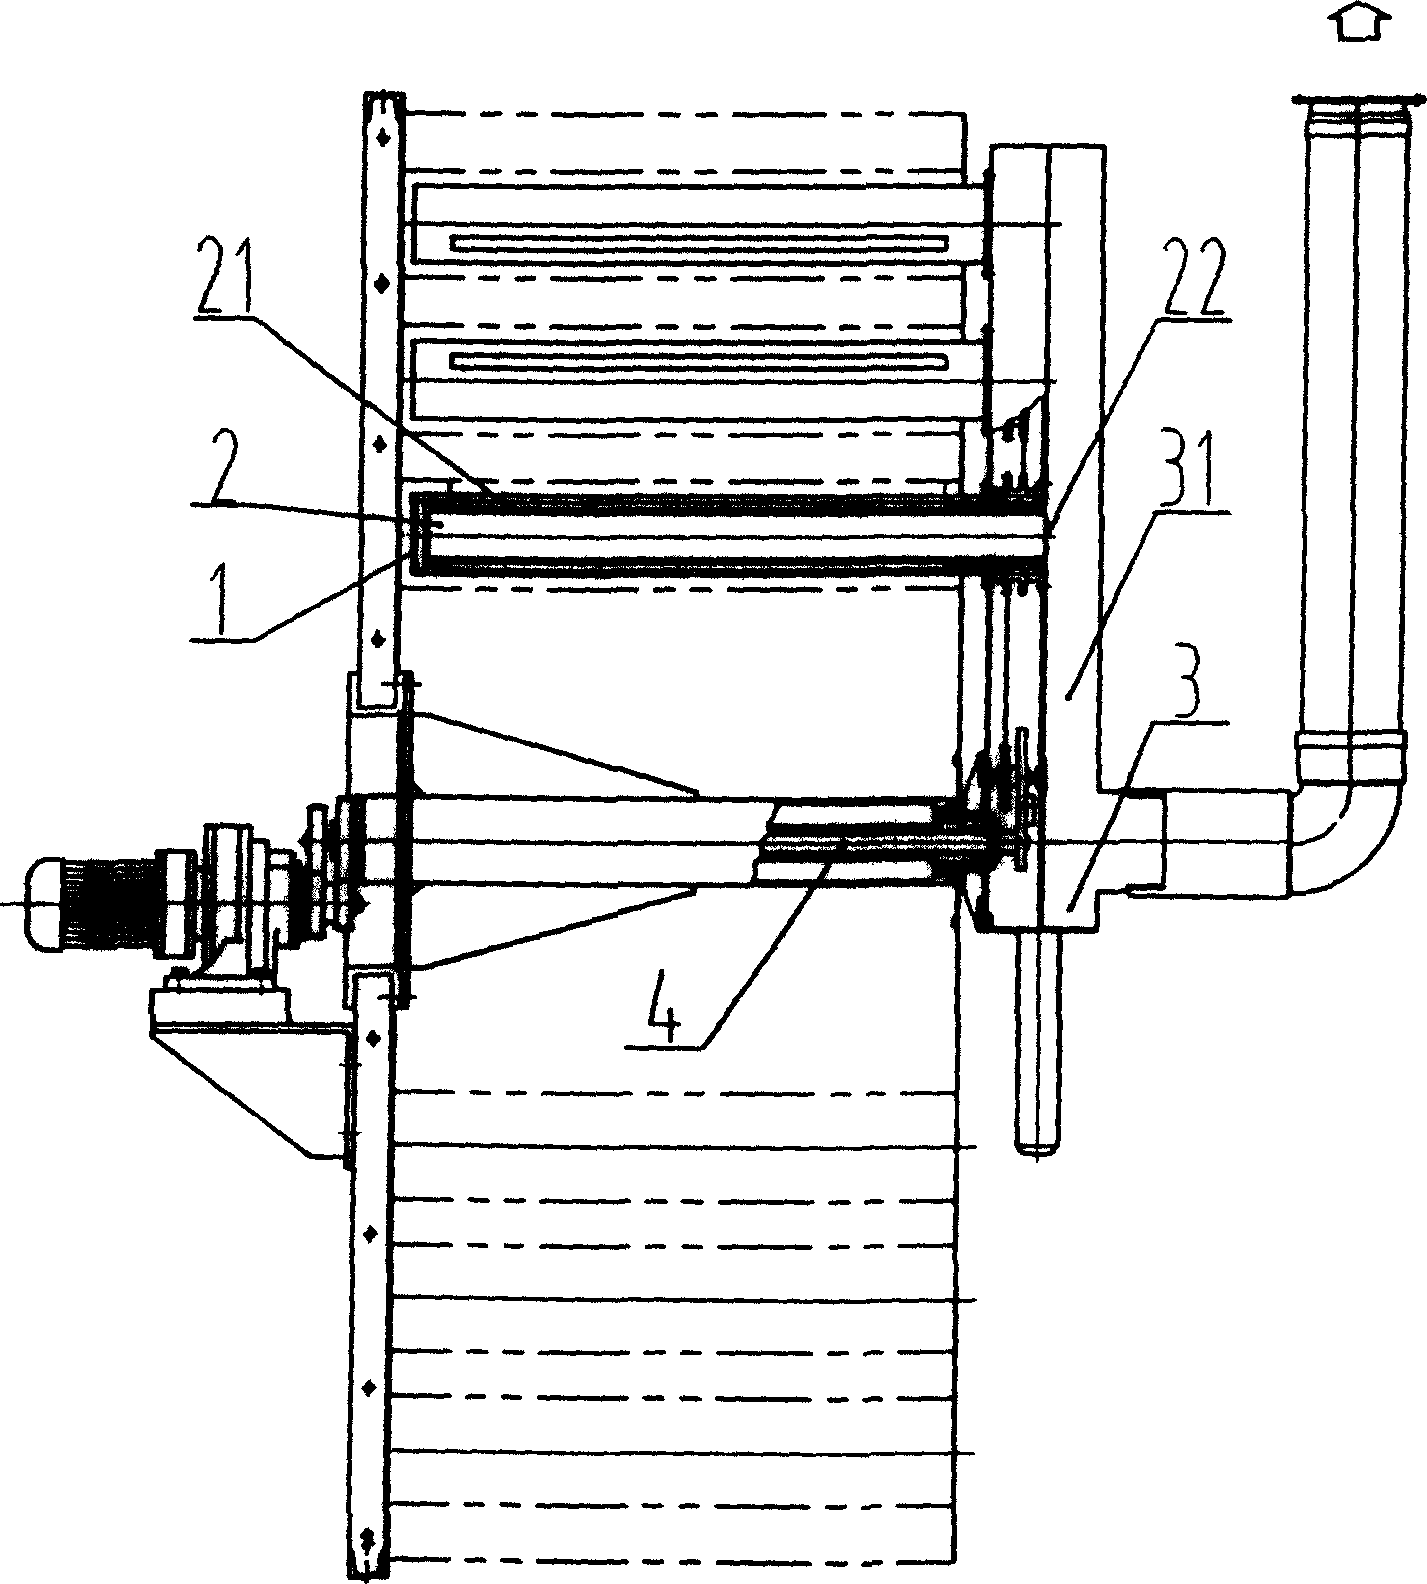 Rotational dust suction mechanism for dust filter